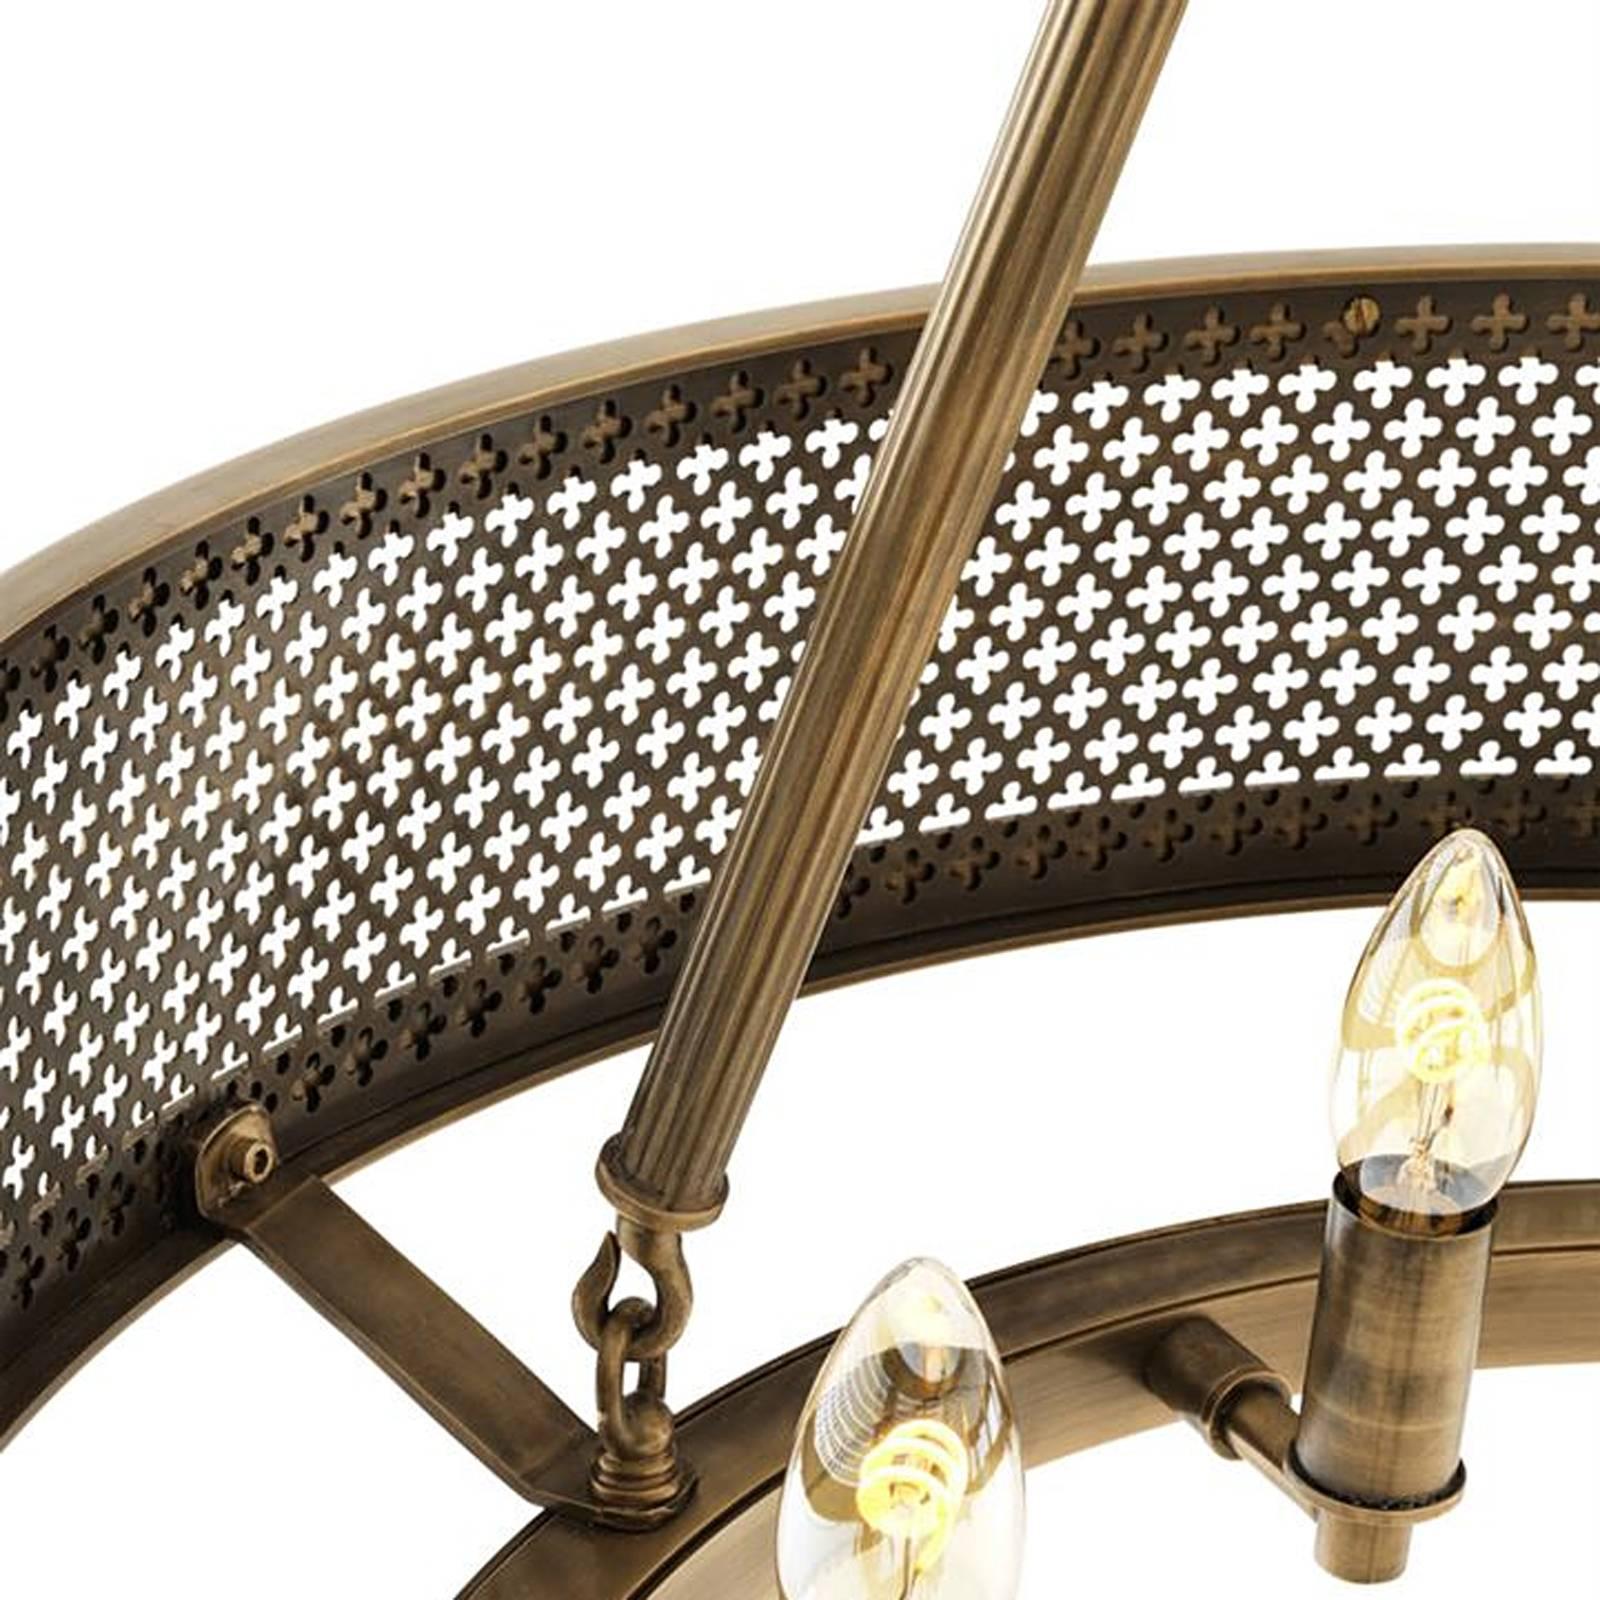 Hand-Crafted Clover Chandelier in Antique Brass Finish